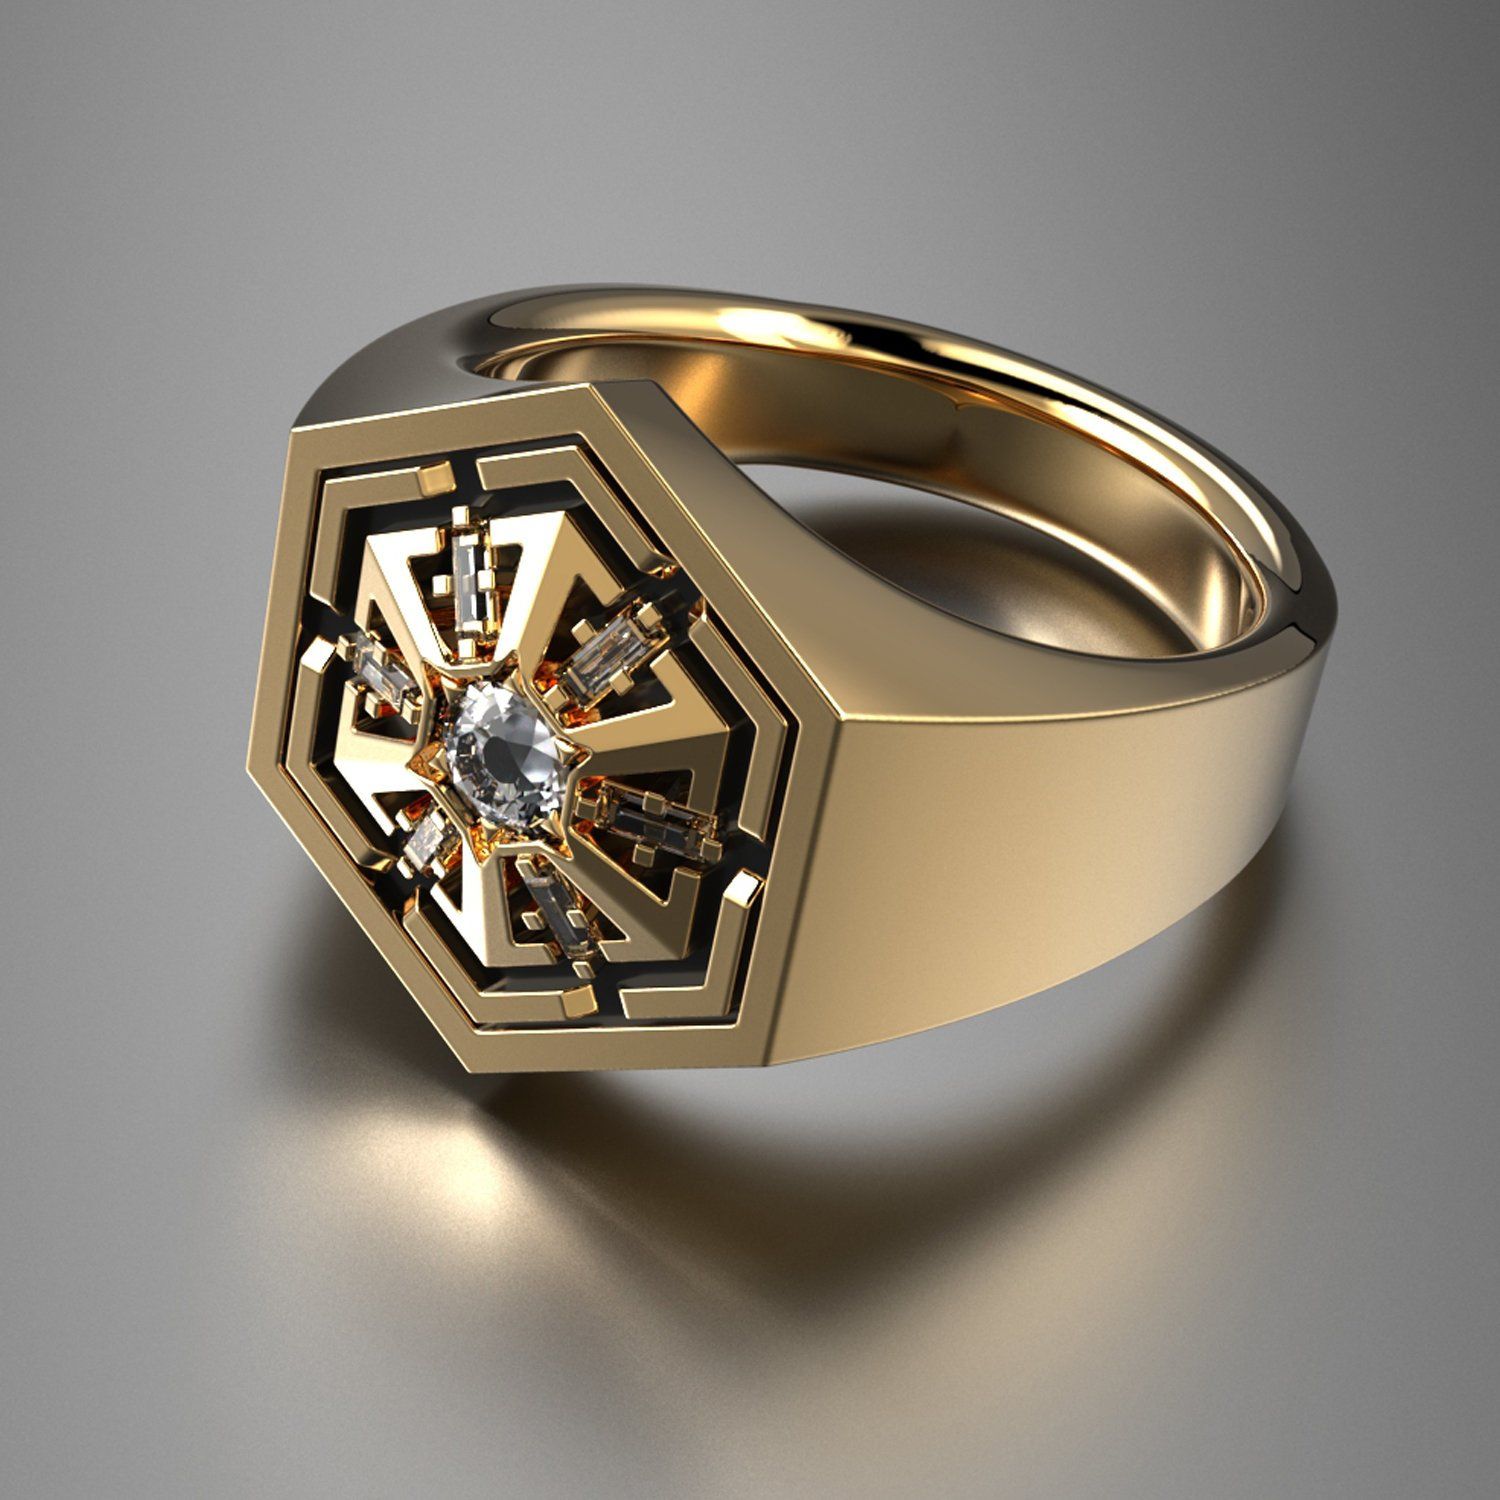 Star wars gold ring jewelry for her and him, star wars engagement and ...